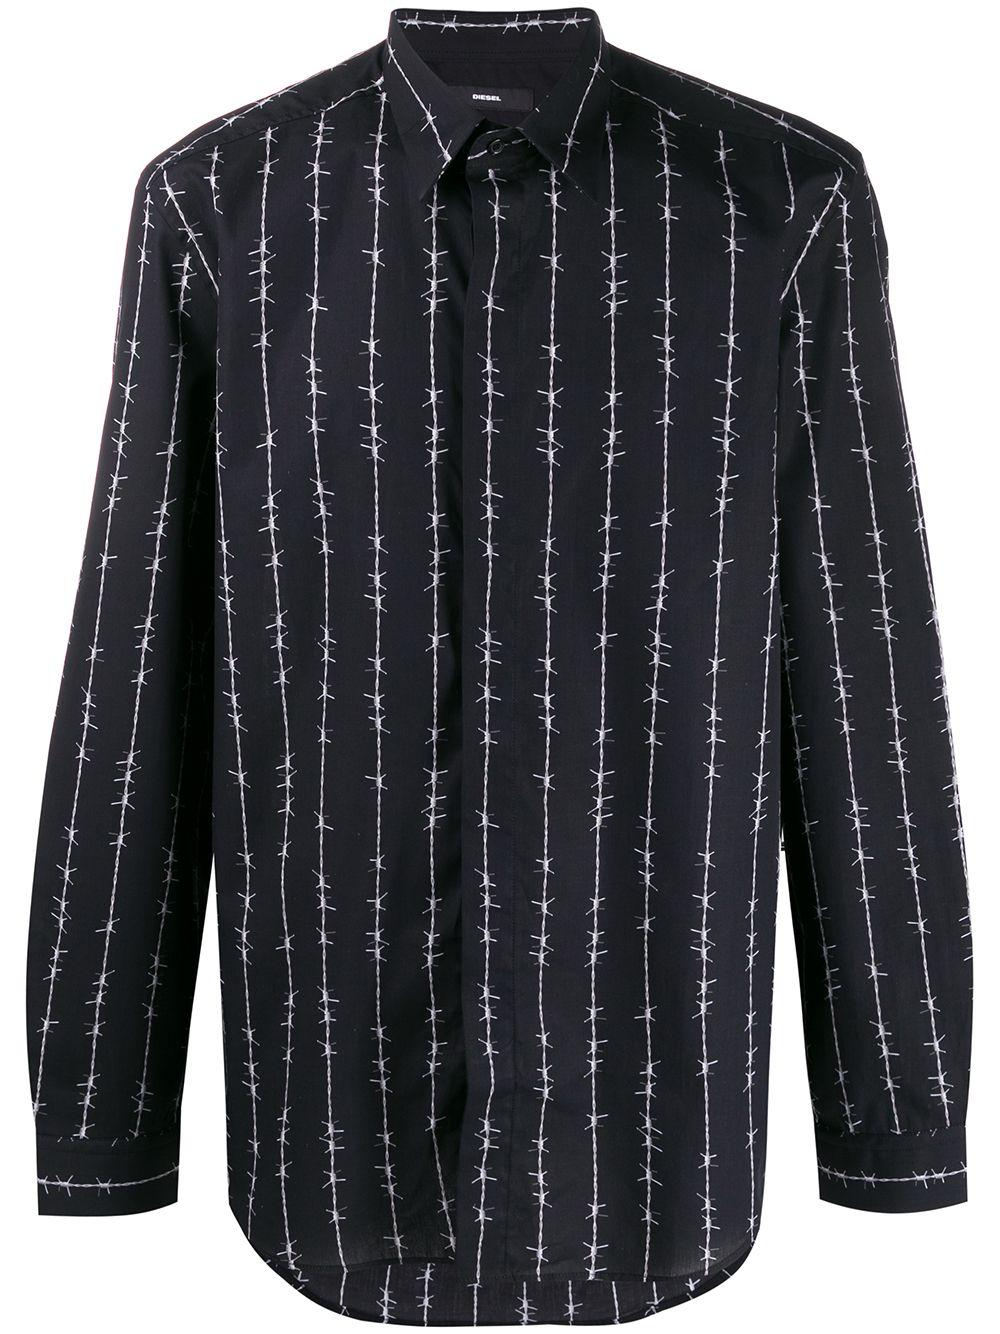 DIESEL S-barbwi Barbed Wire-print Shirt in Black for Men - Lyst